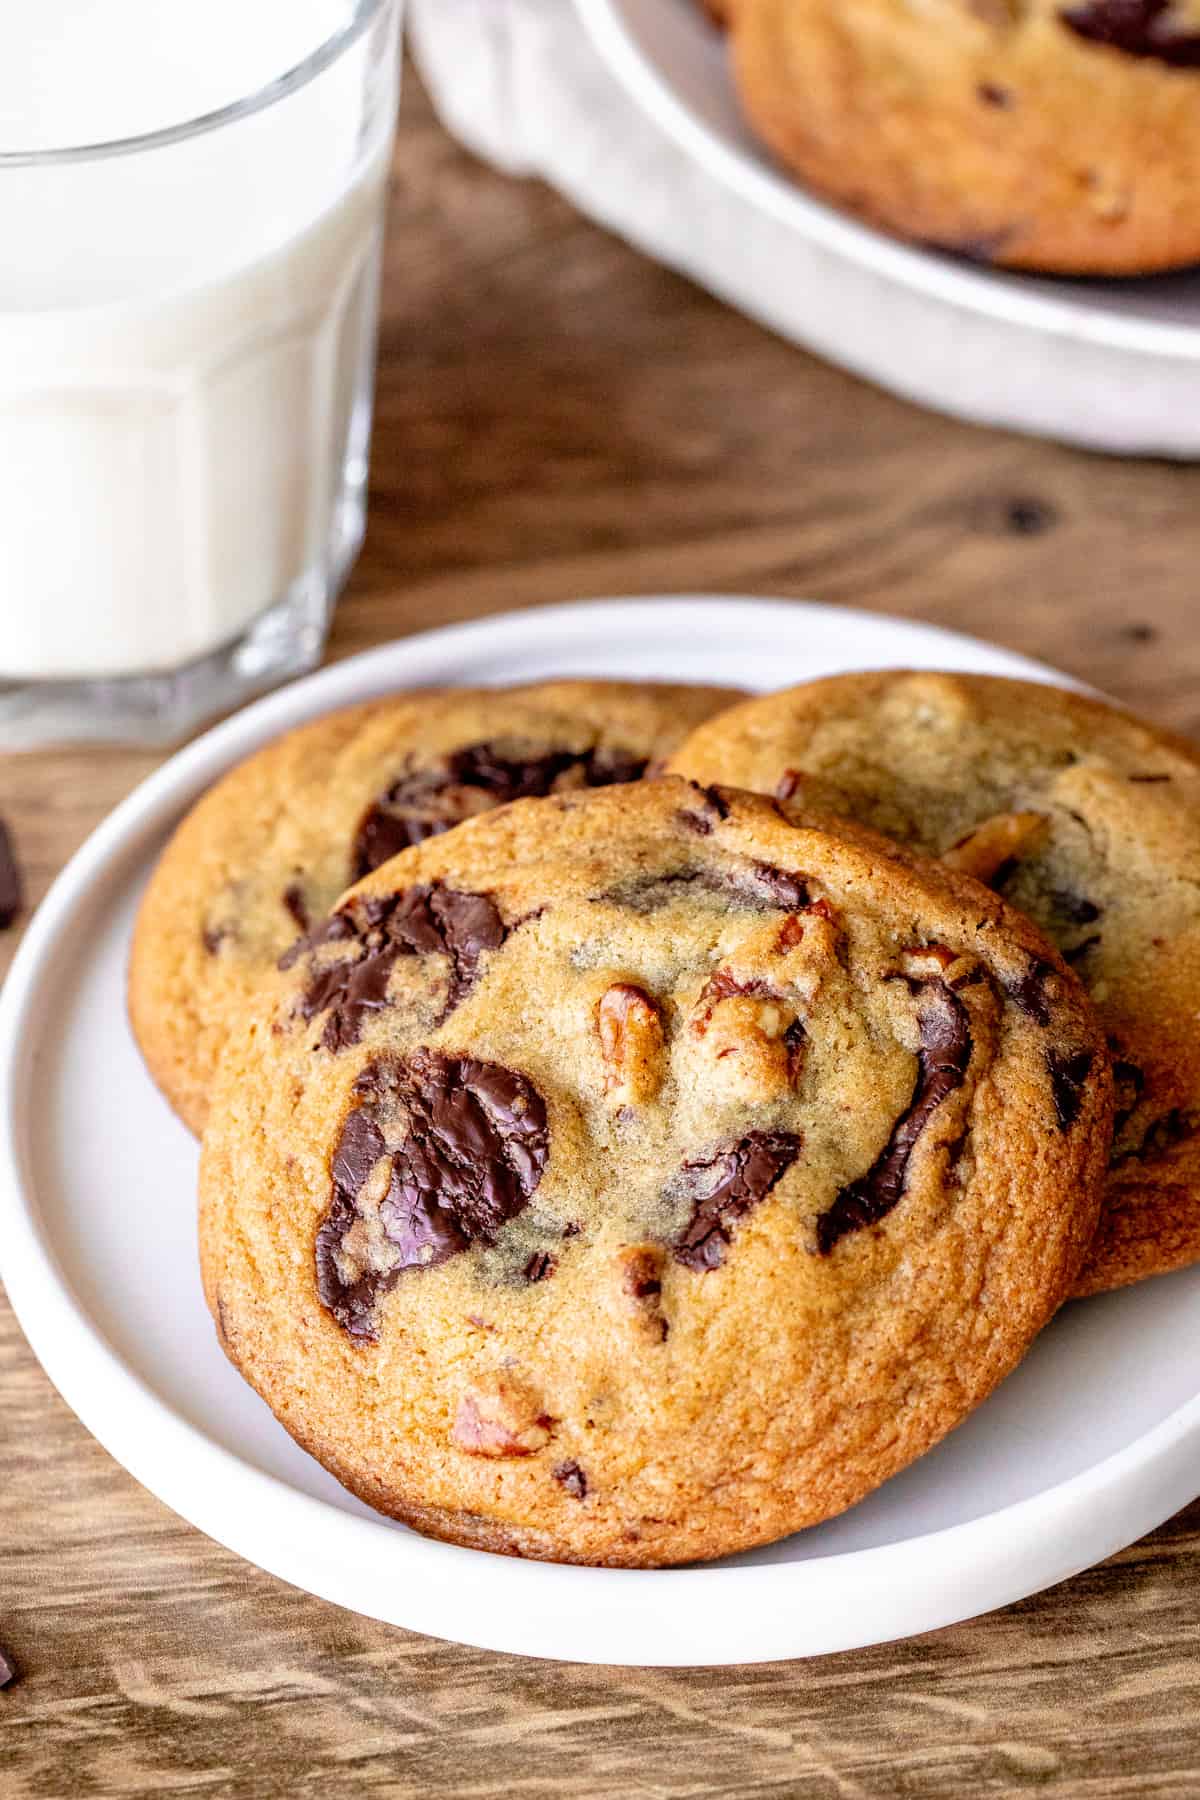 Plate of pecan chocolate chip cookies